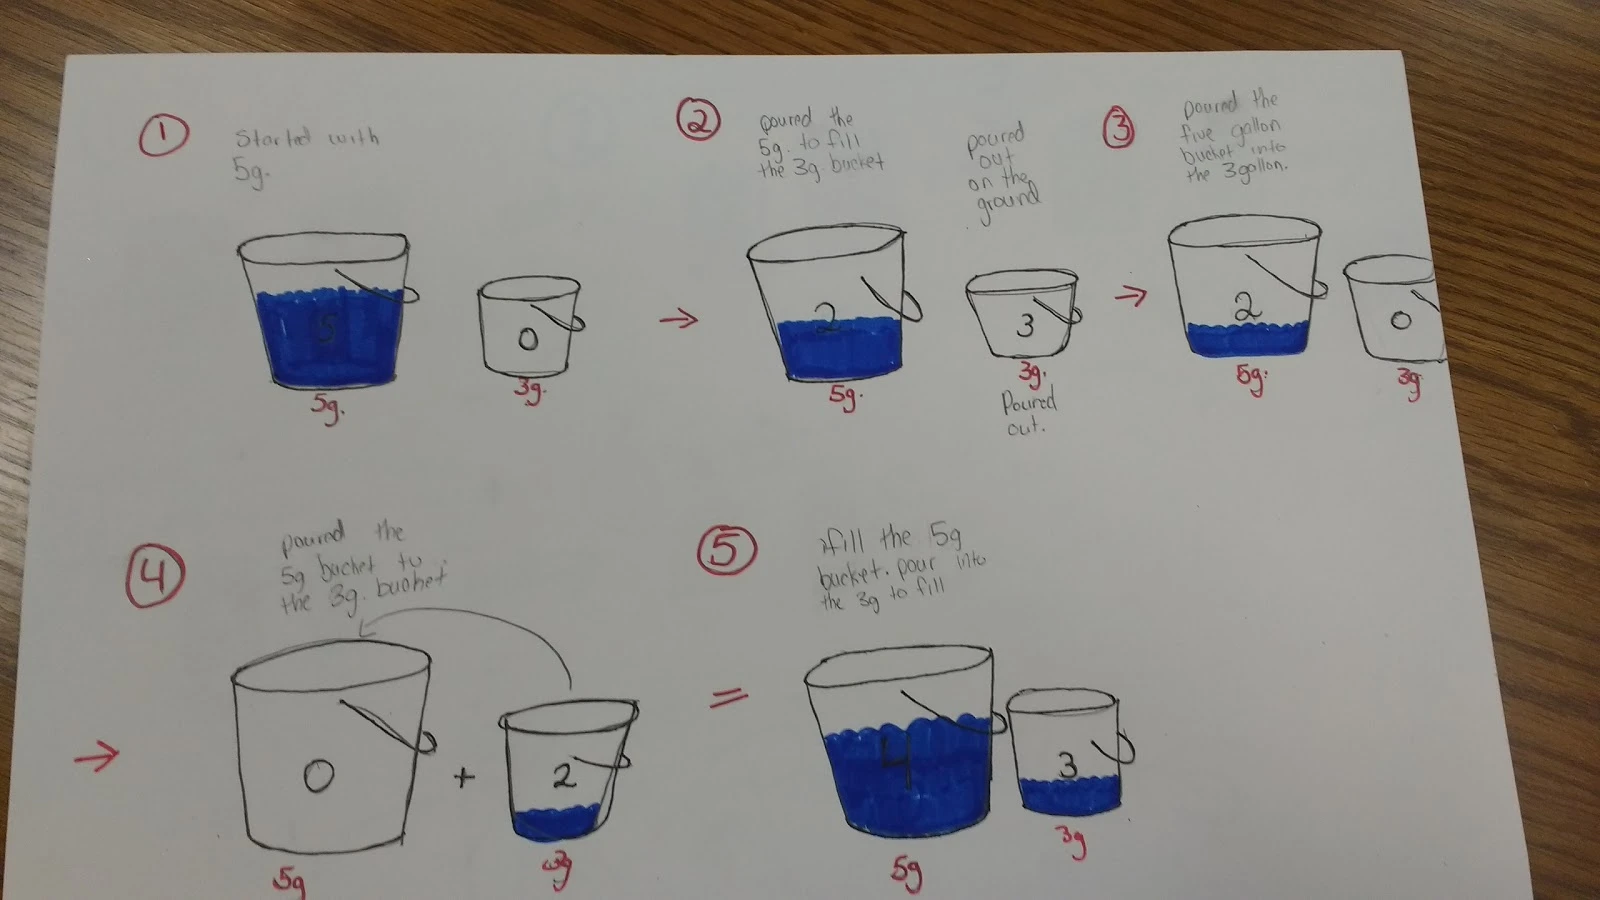 Two Buckets Puzzle - Poster of Student Work